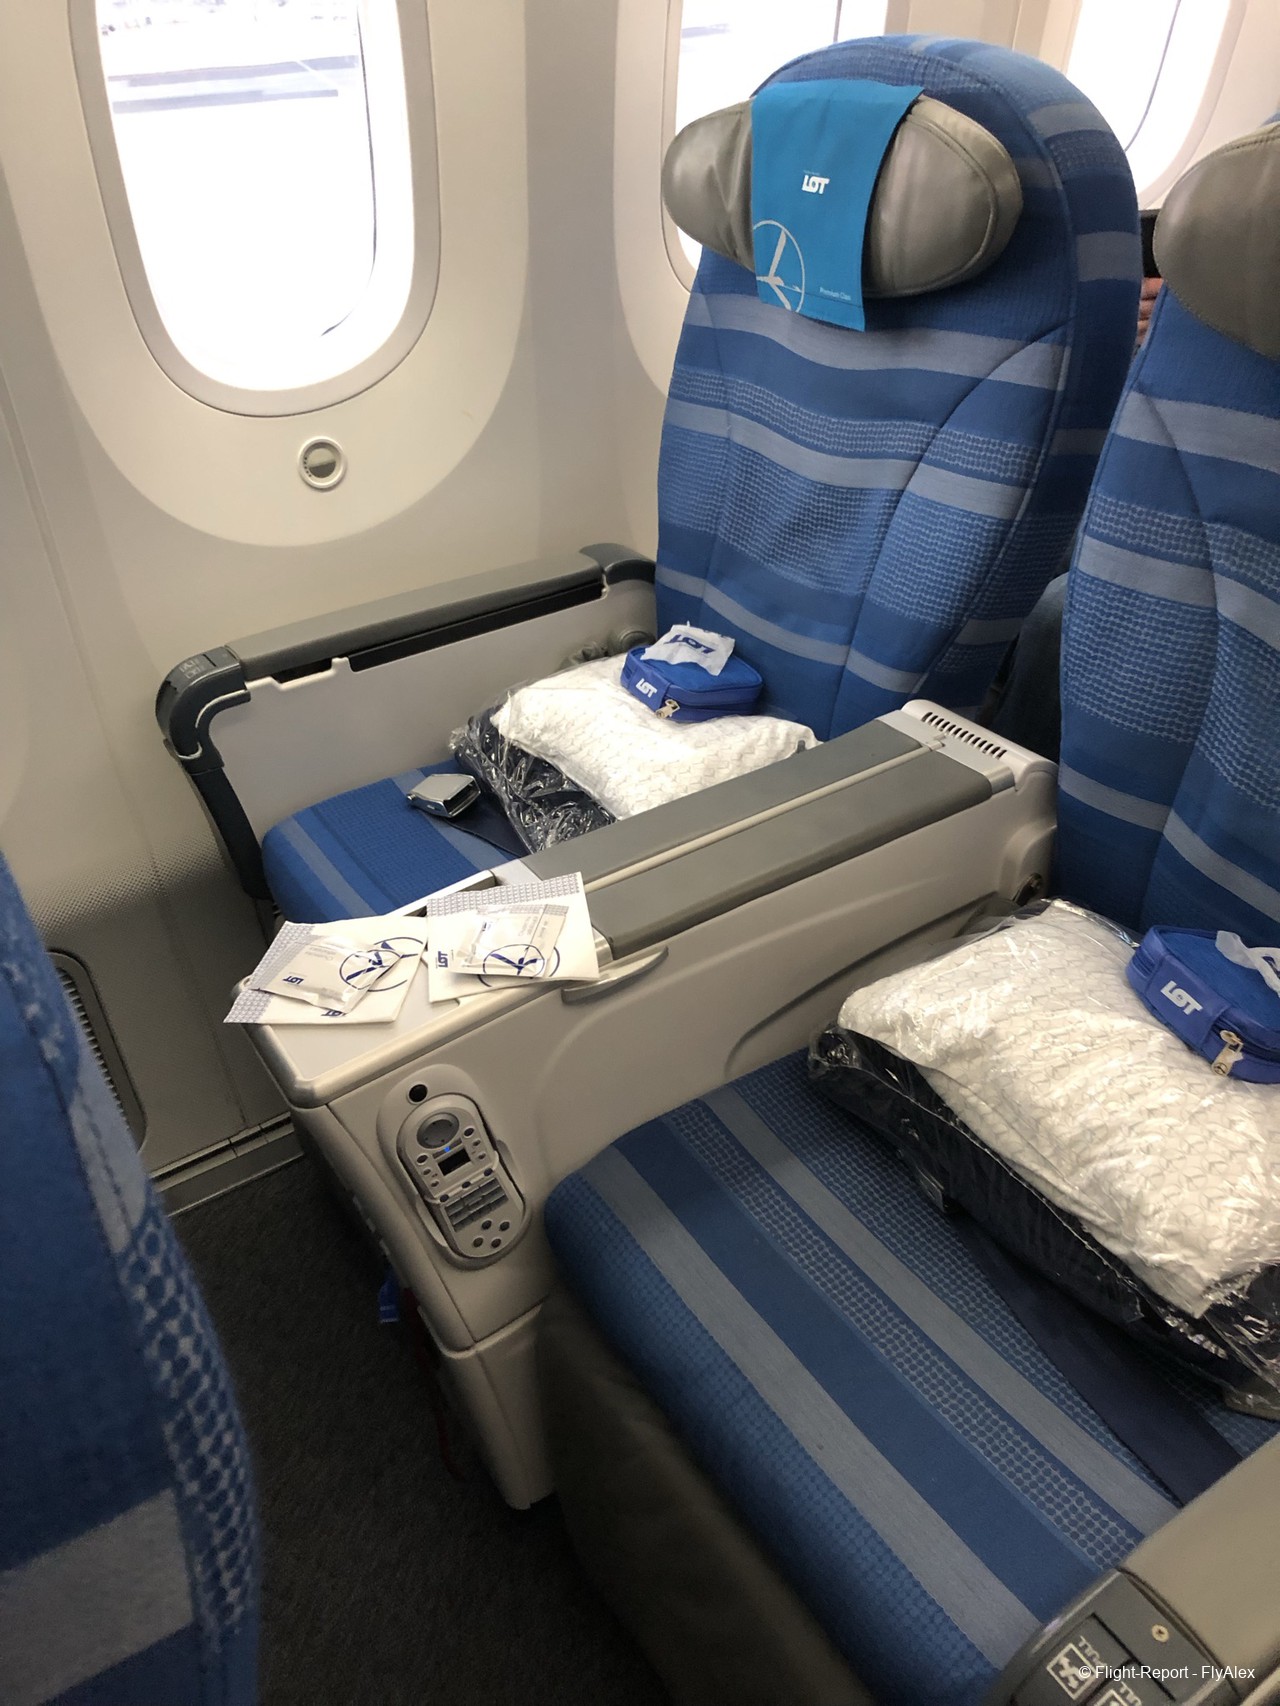 LOT Polish Airlines Flights and Reviews (with photos) - Tripadvisor